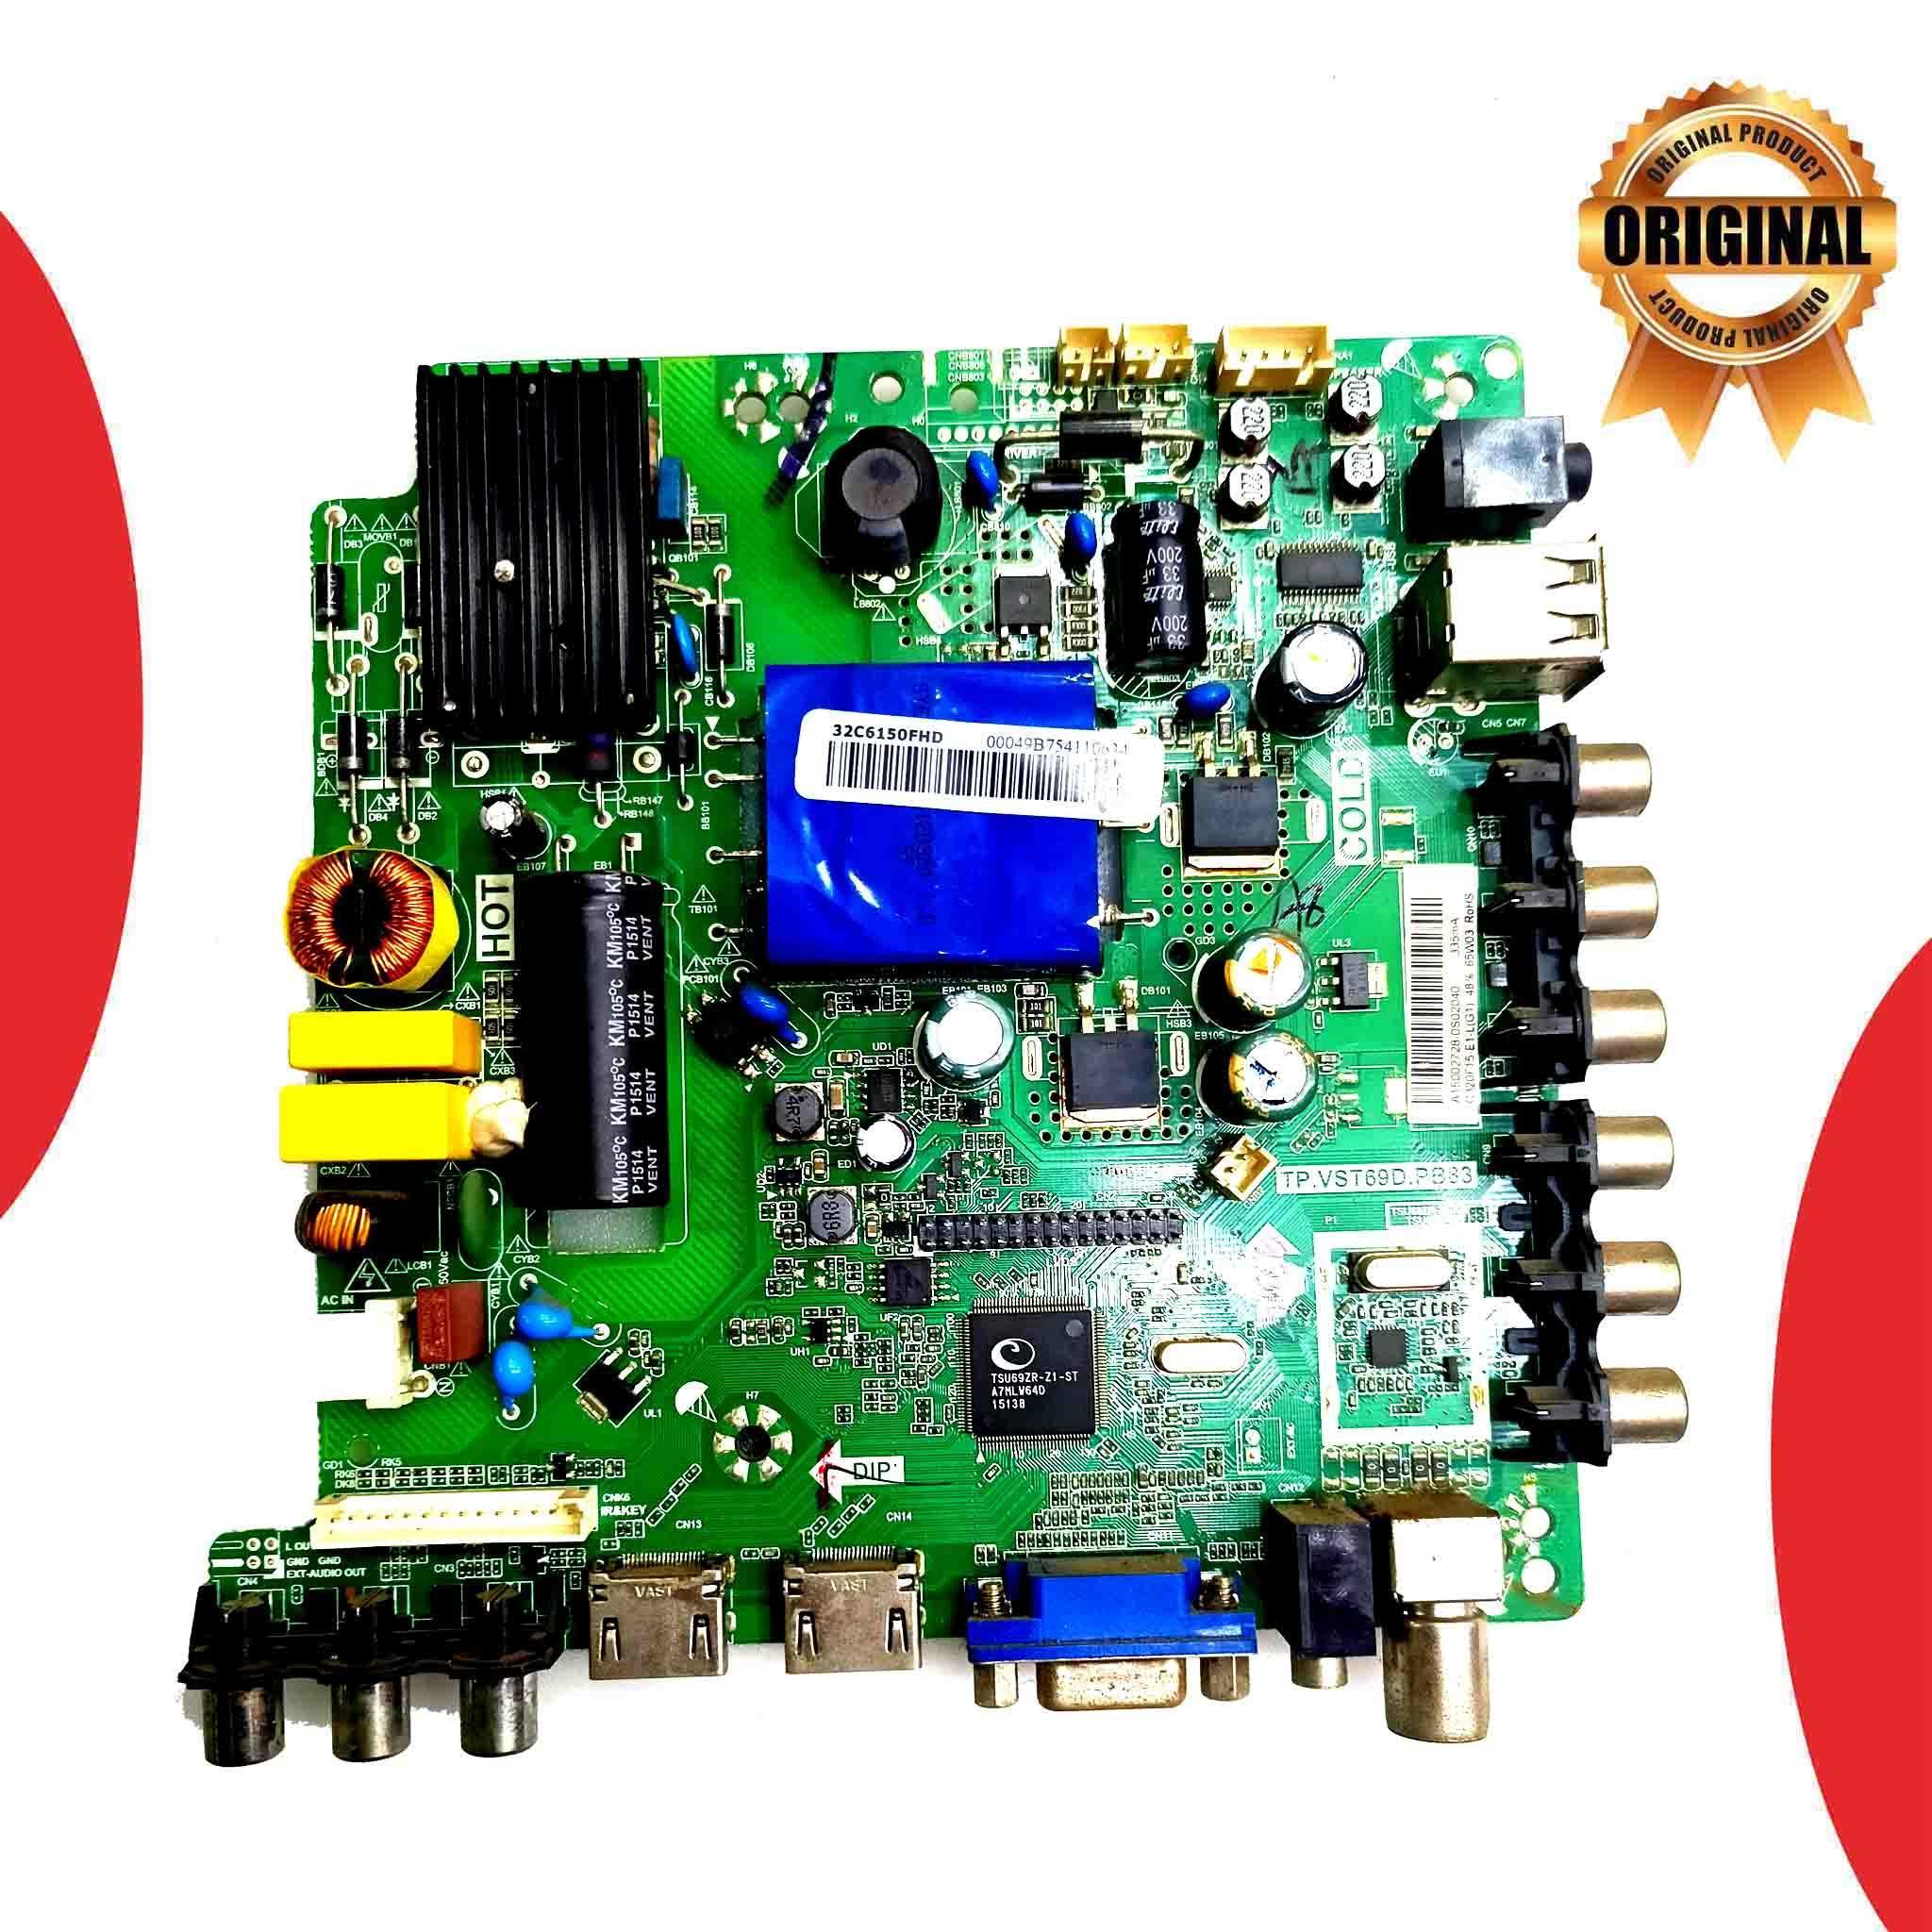 Micromax 32 inch LED TV Motherboard for Model 32C6150FHD - Great Bharat Electronics